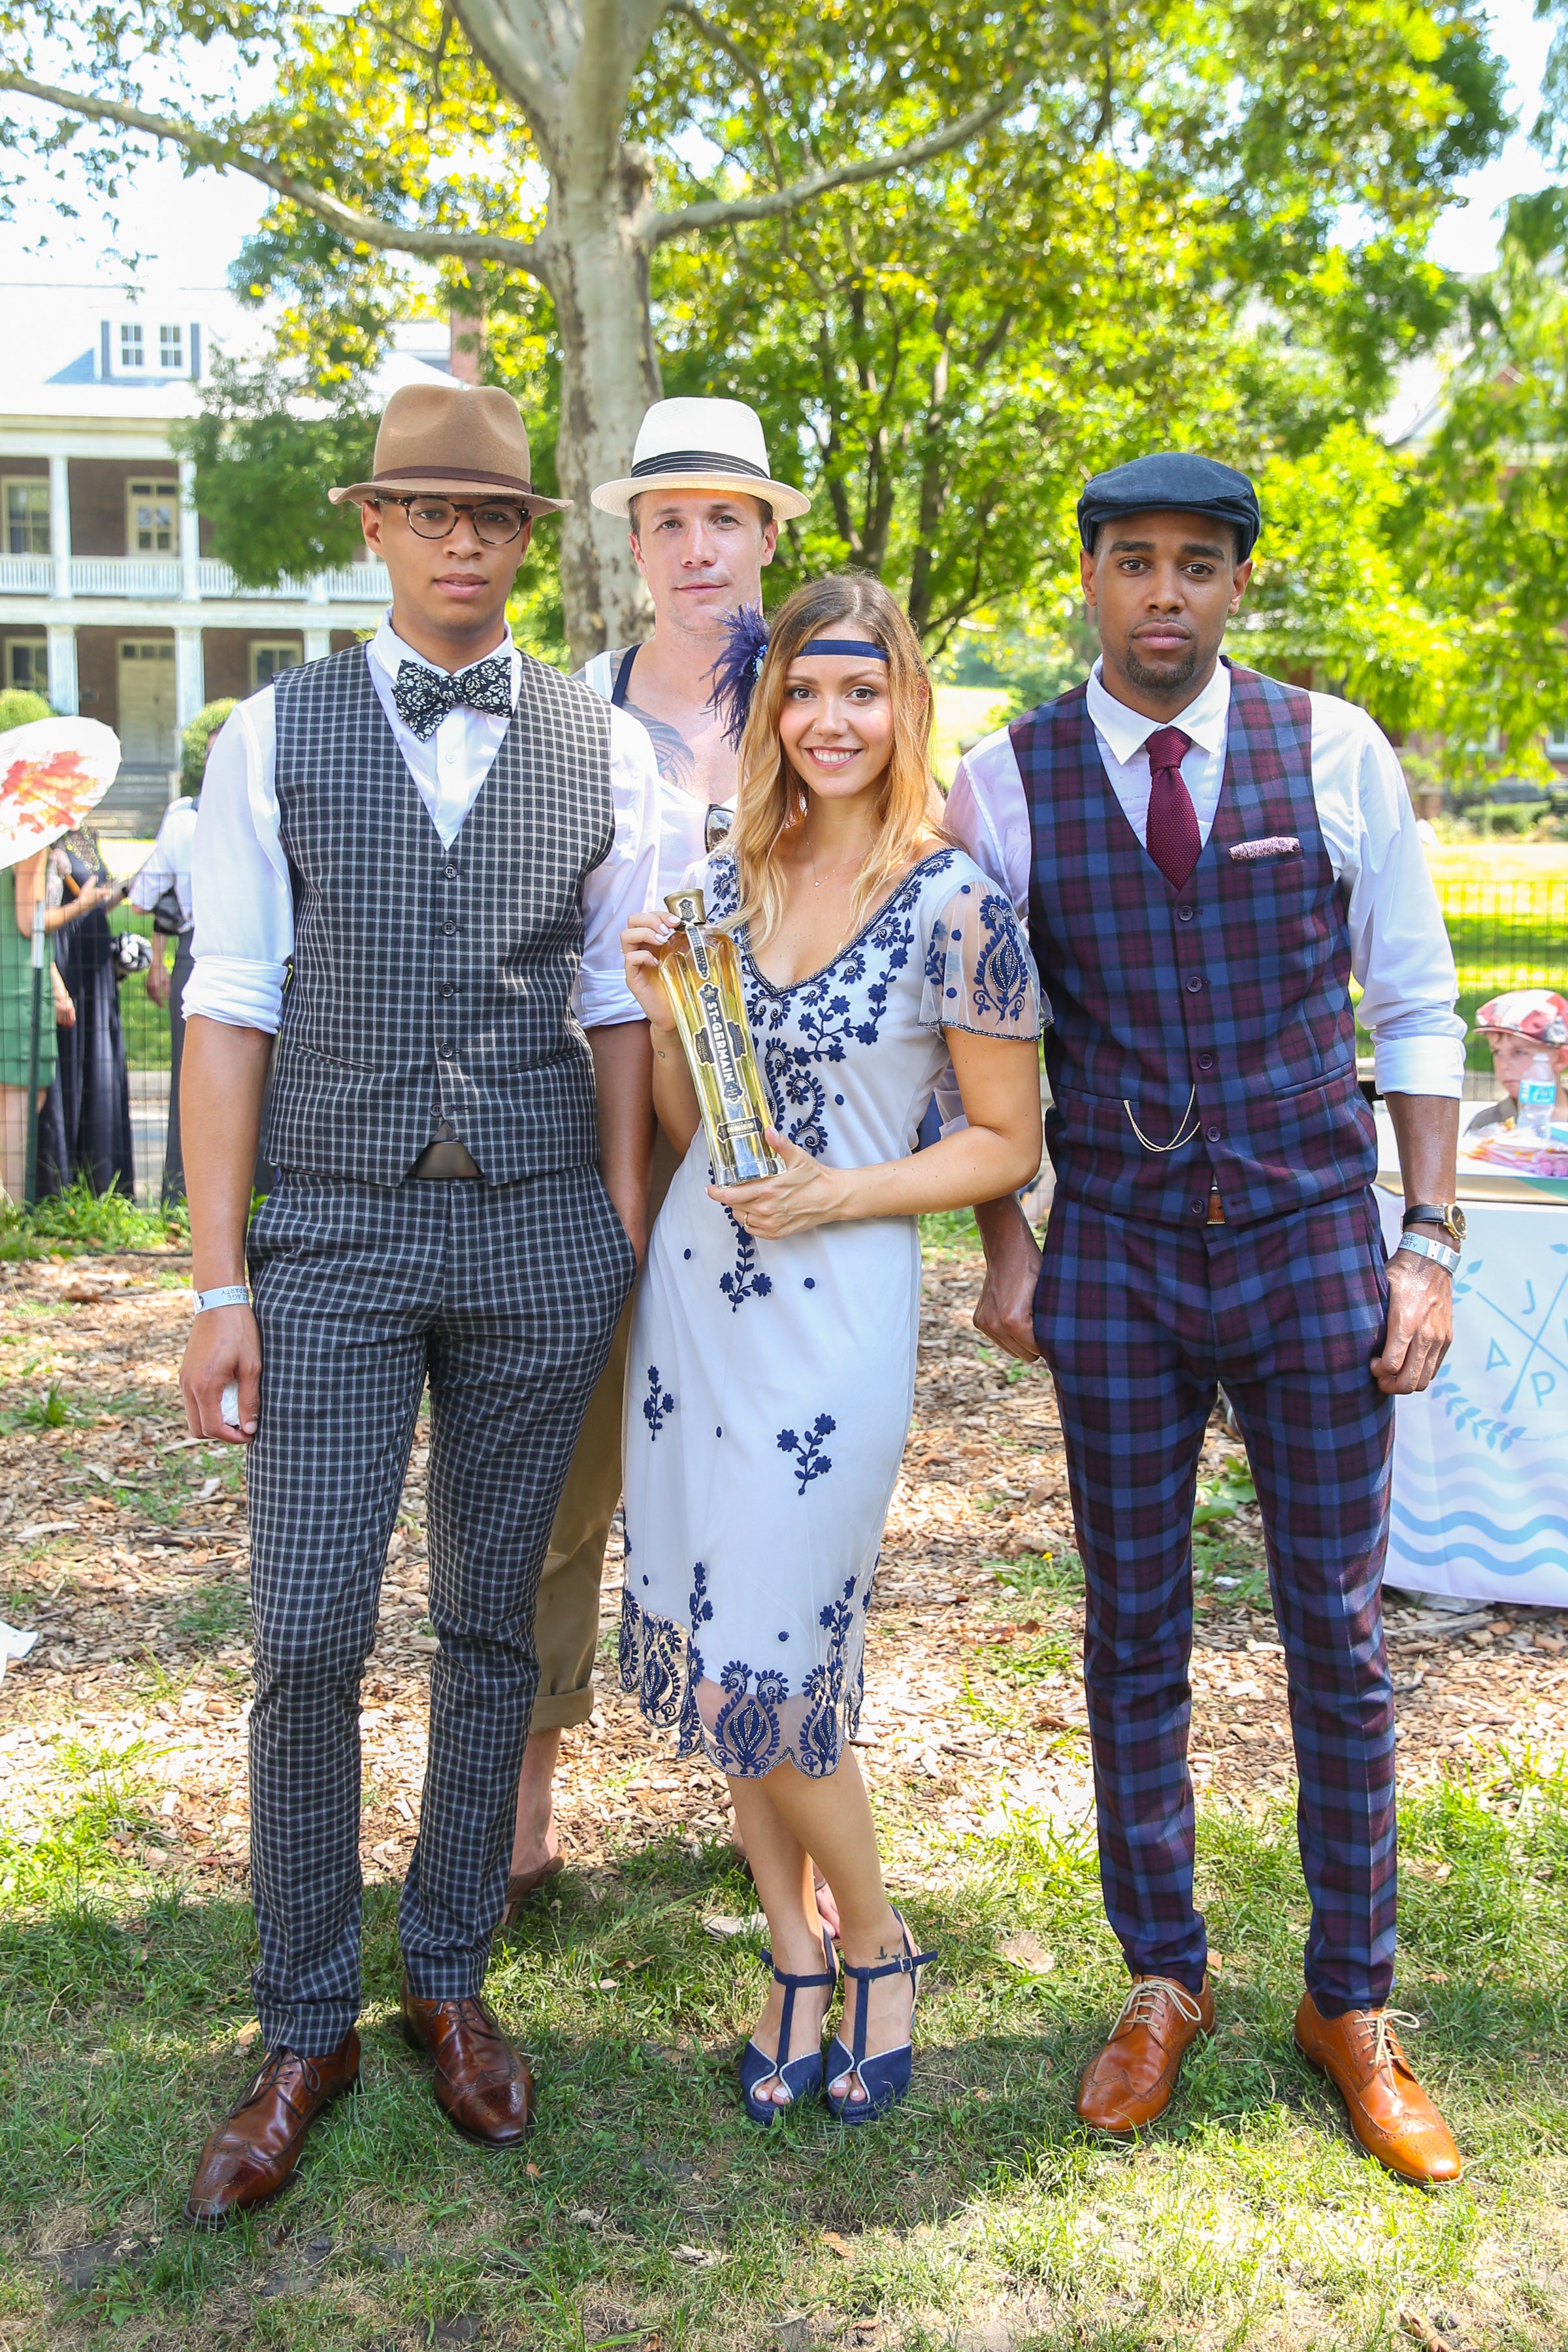 Take A Step Back In Time at The Jazz Age Lawn Party
